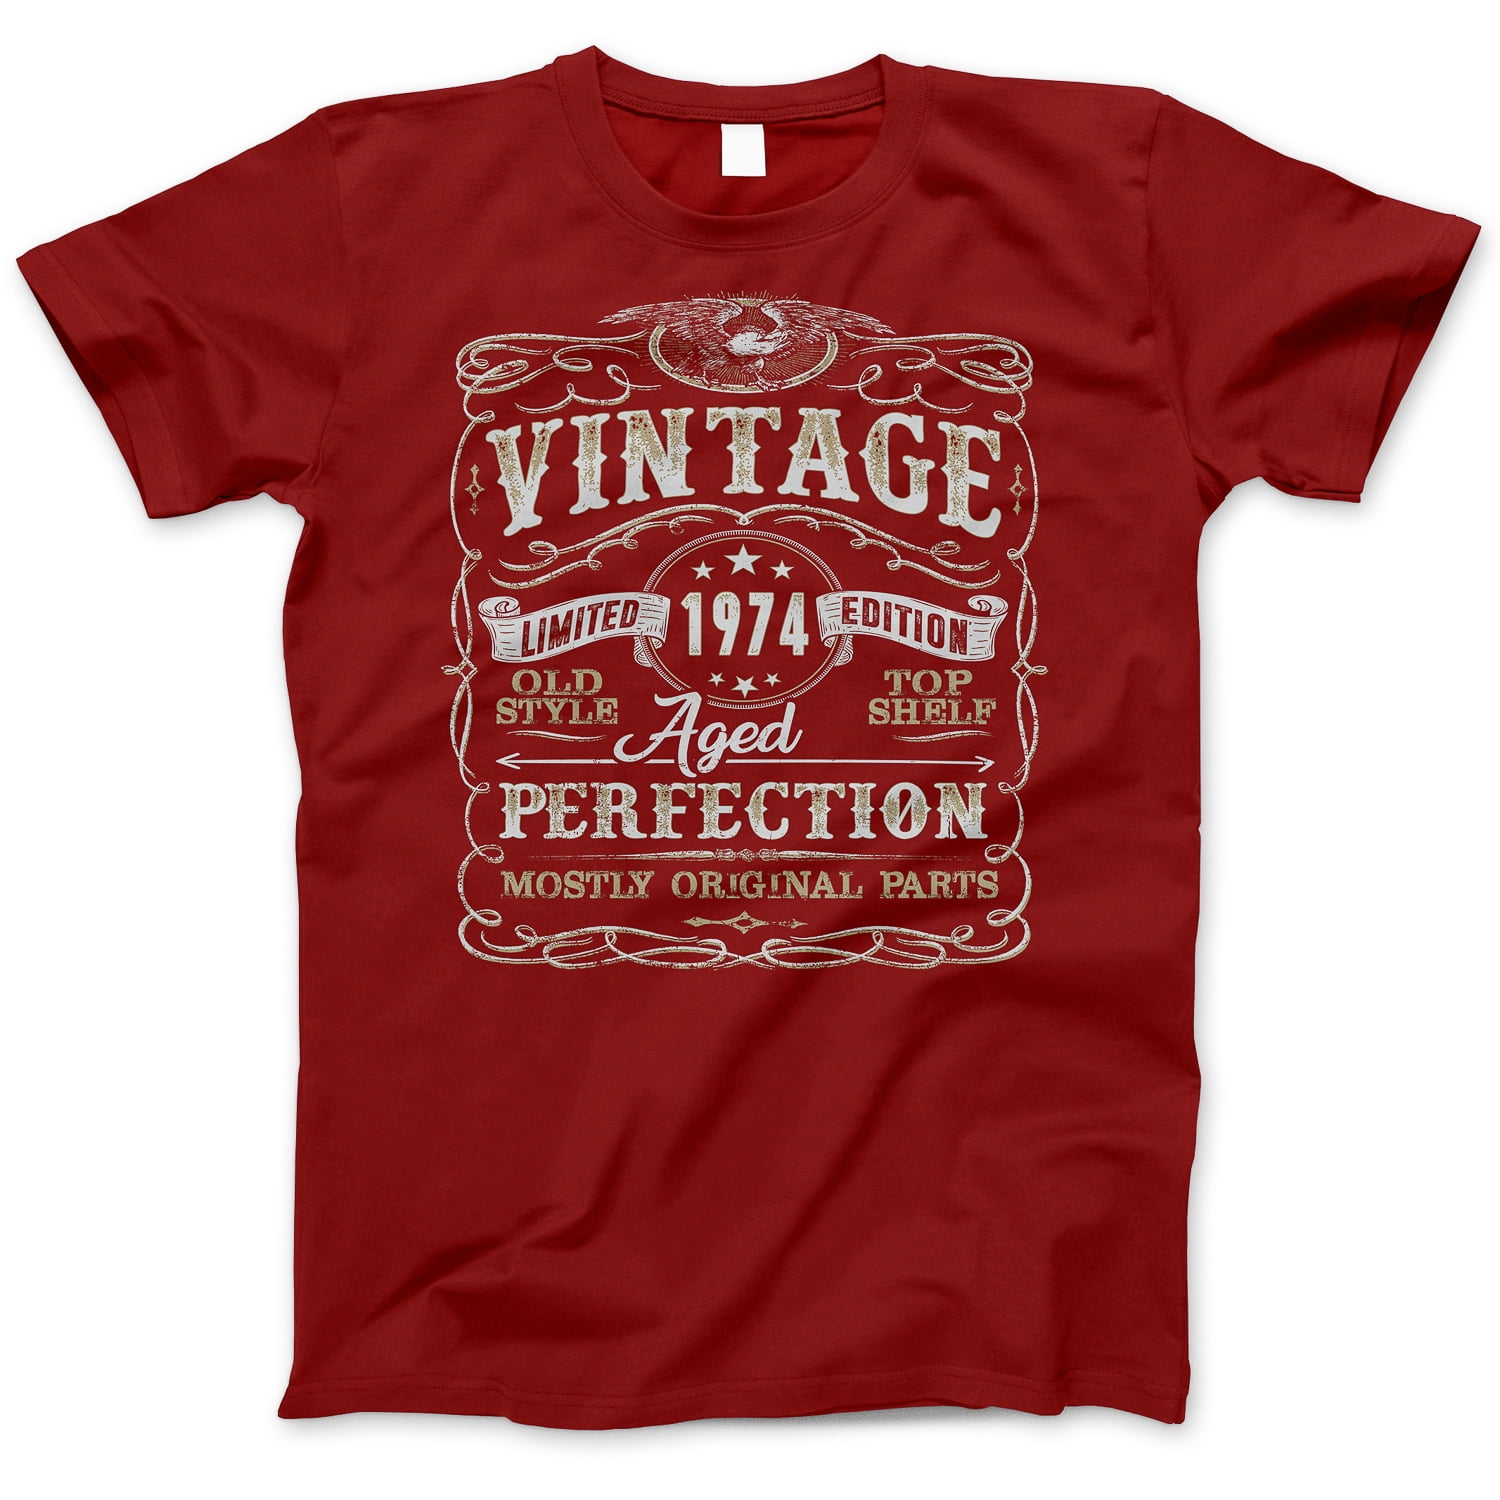 45th Birthday Born in 1974 Retro Style Vintage Limited Edition T-shirt Tee Top 